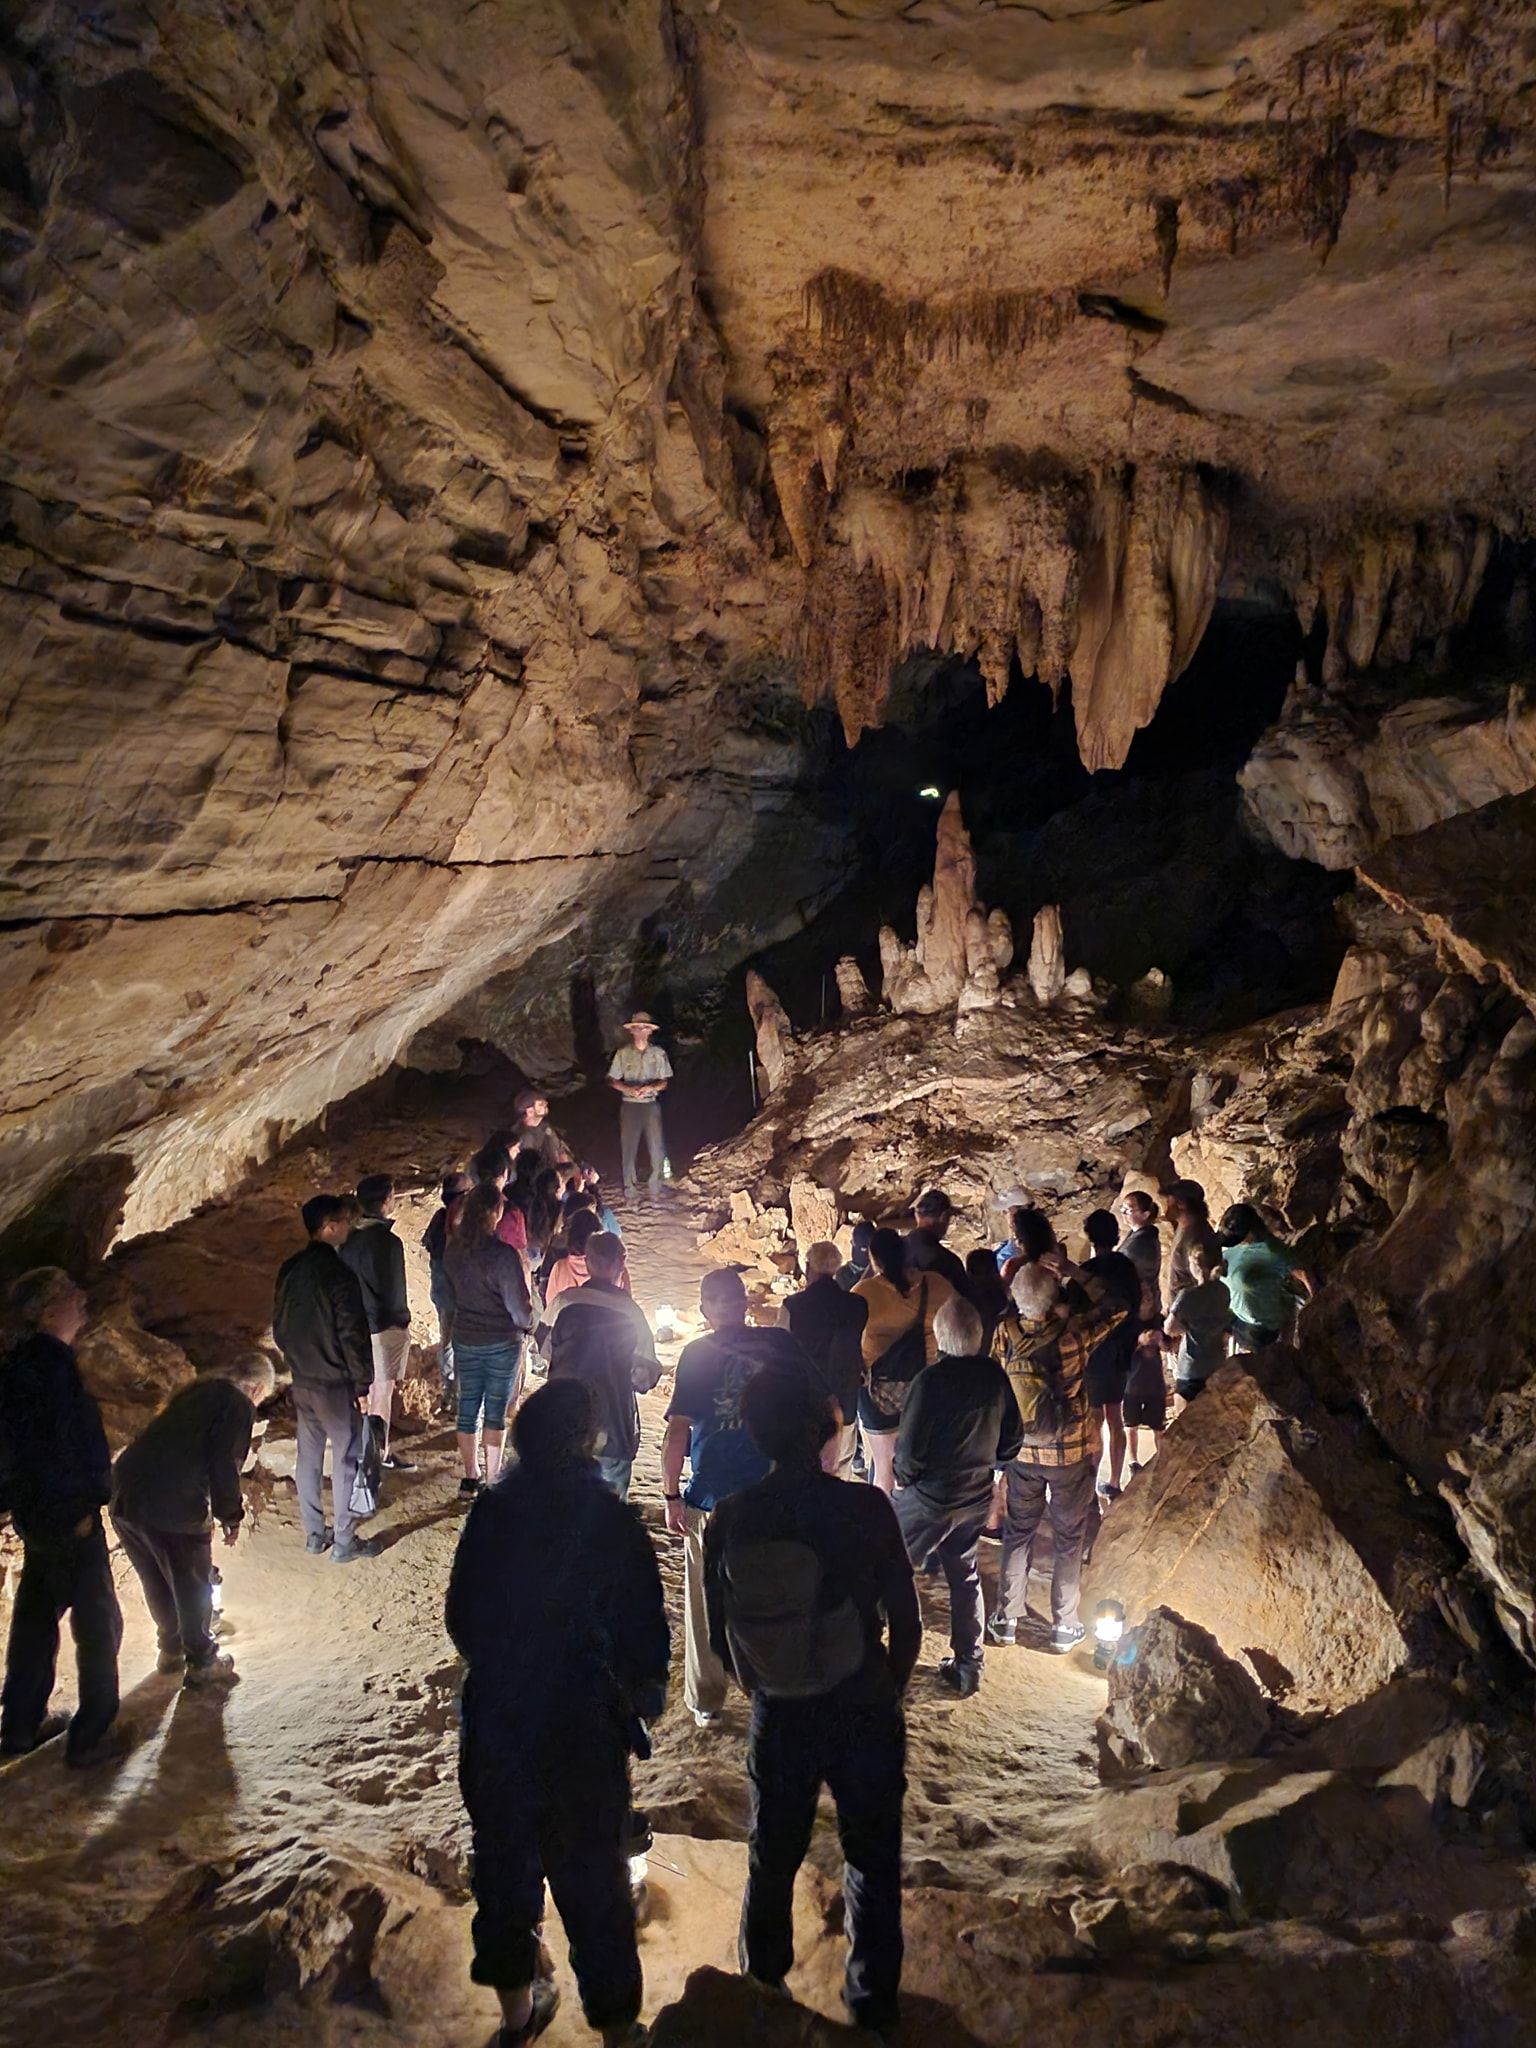 World's Longest Cave System: world record in Edmonson County, Kentucky